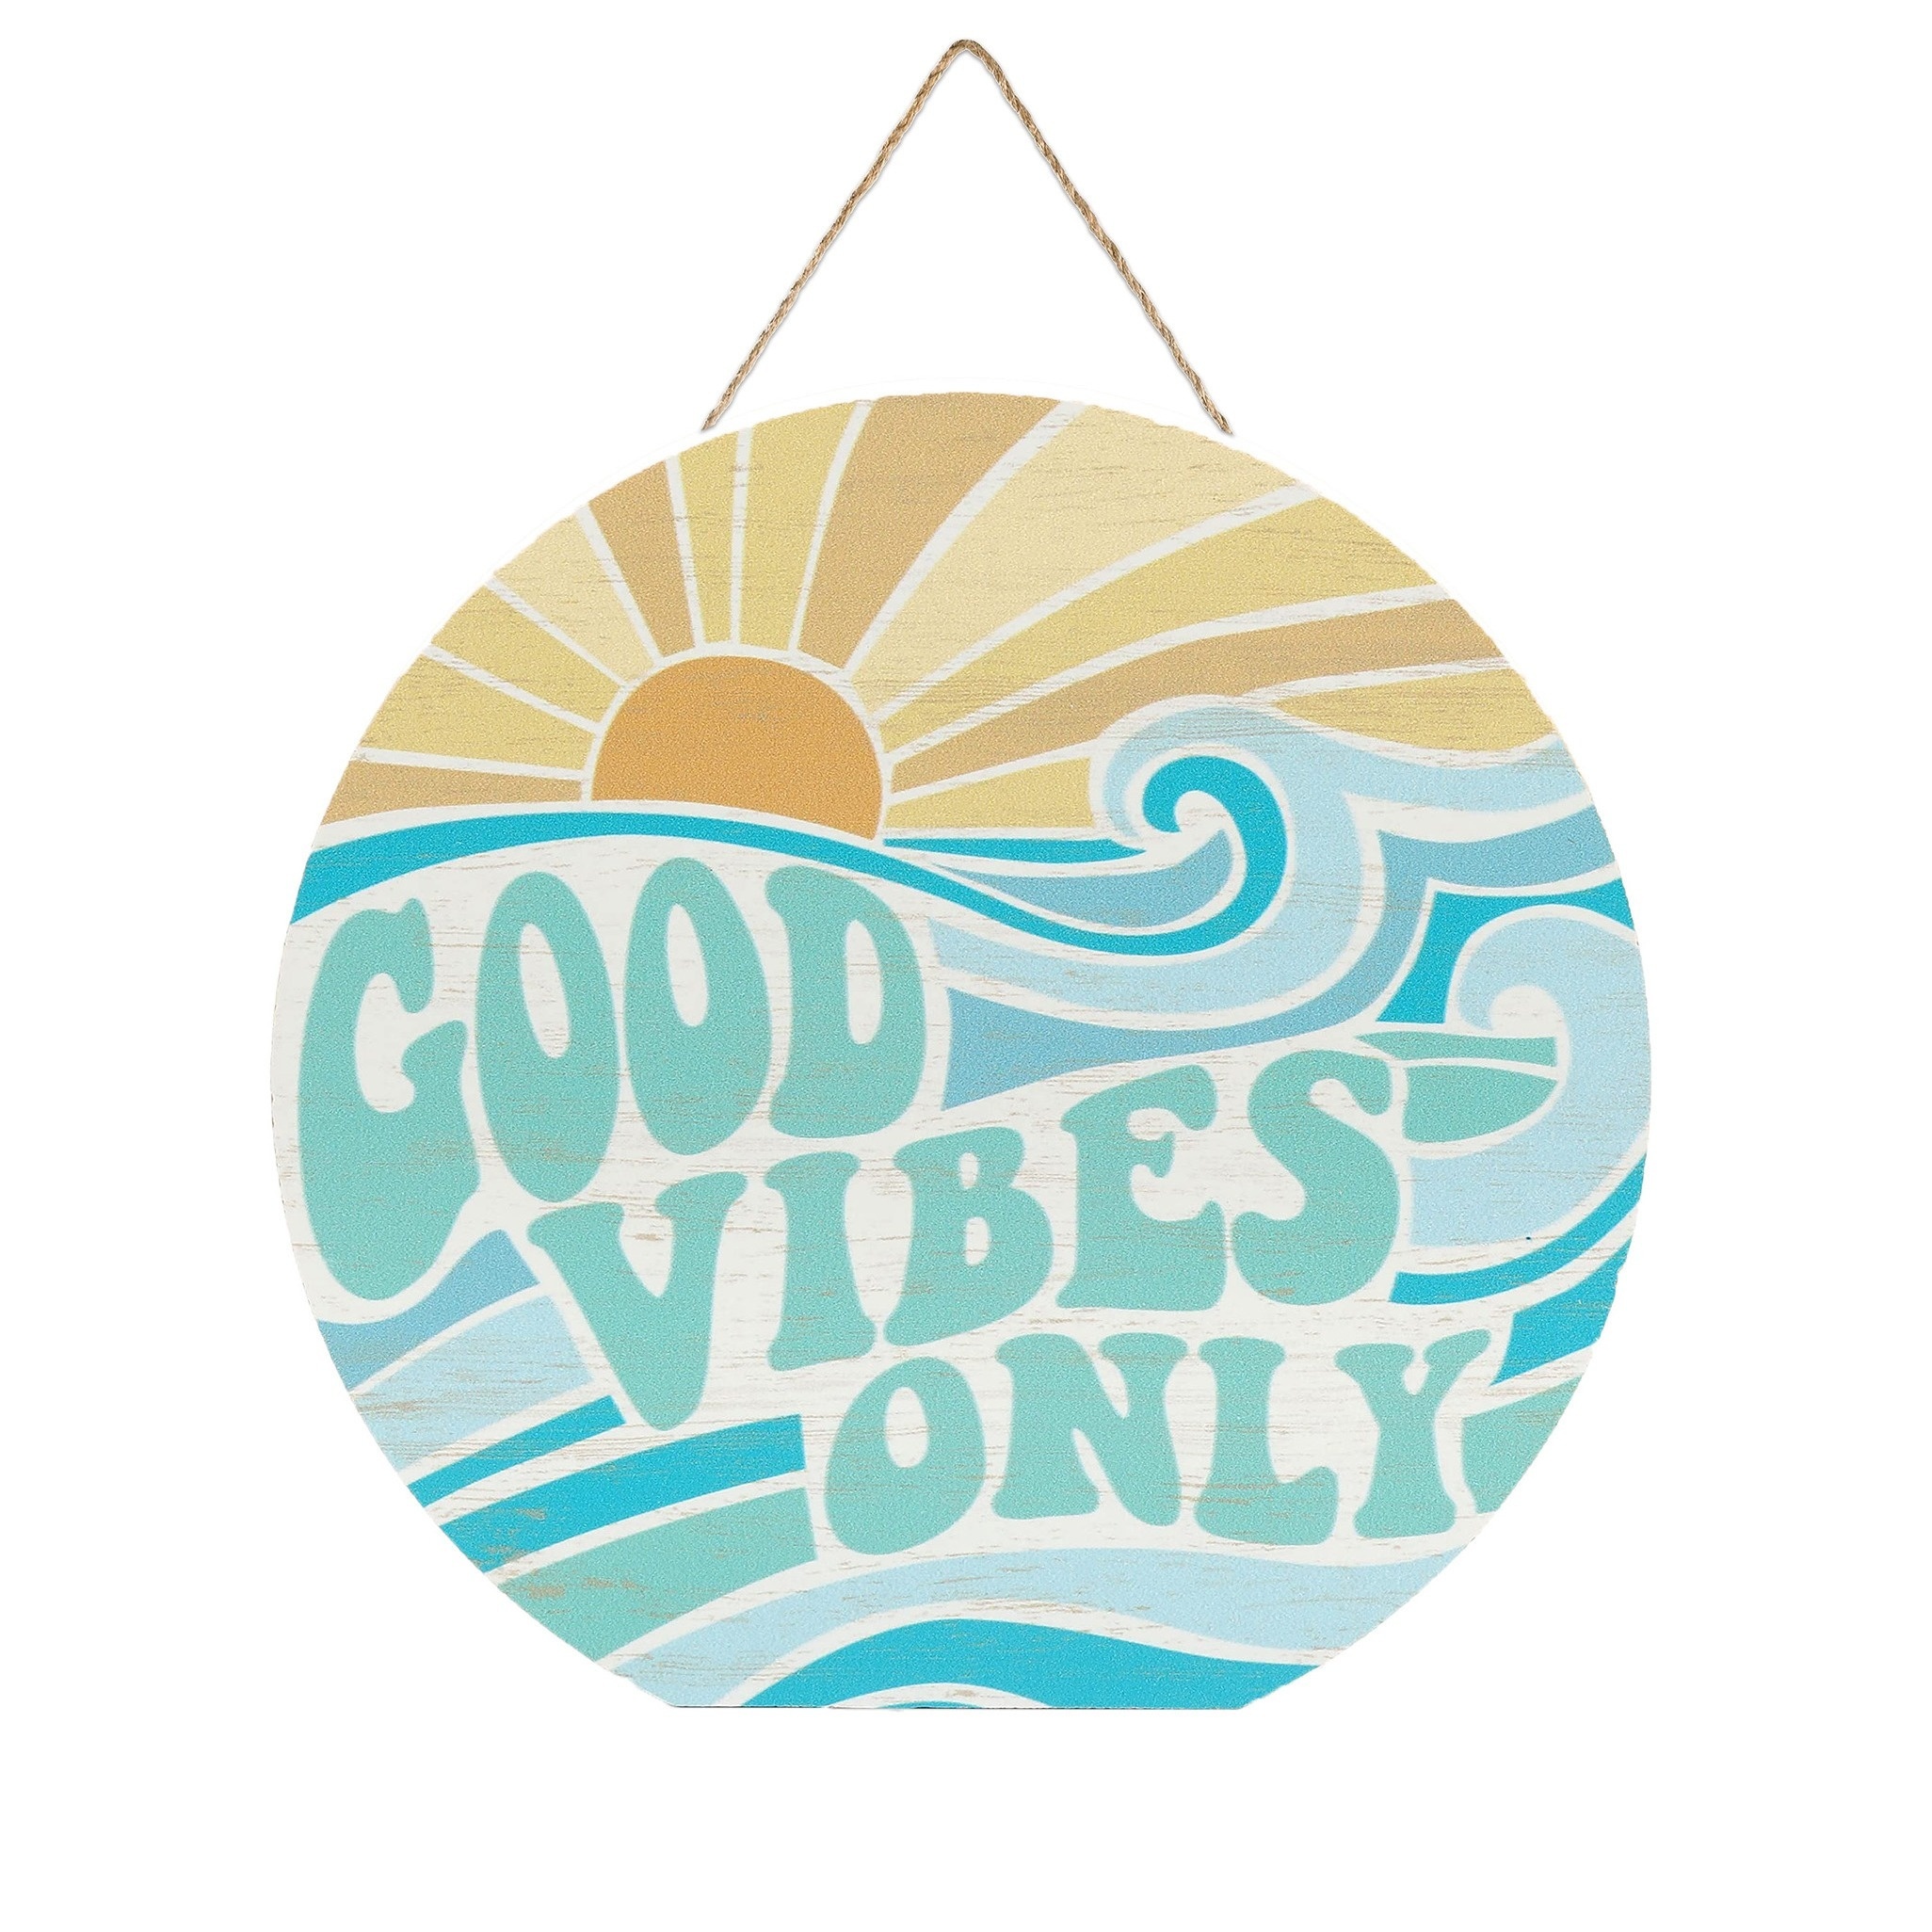 

1pc Hanging On The Wall, Good Vibes Only, Chunky Wood Block Sign - Retro Beach Themed Decor - Hang Or Display On Desk, Dresser Or Counter